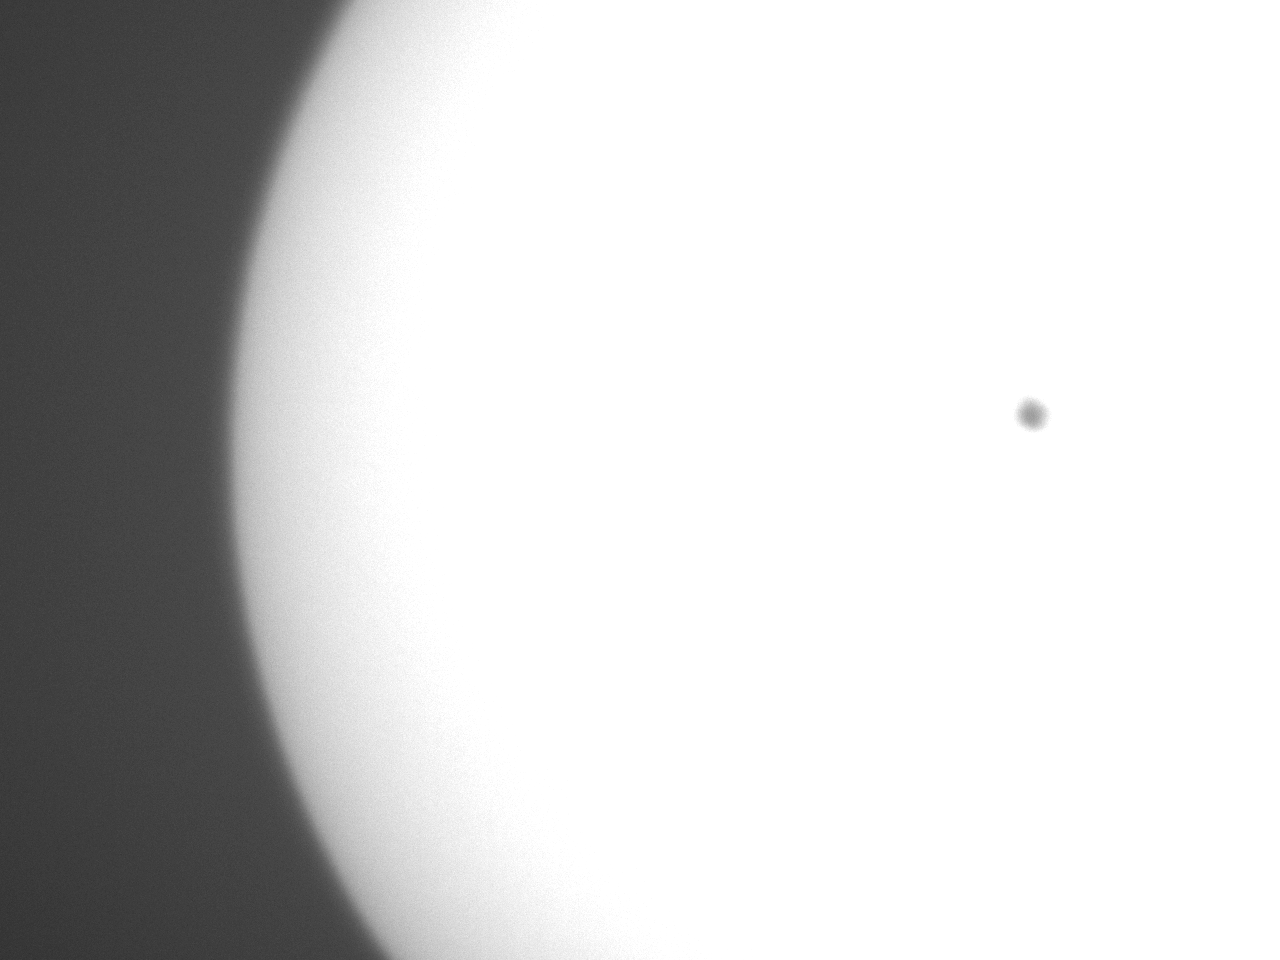 Sun With Sunspot 2546.png